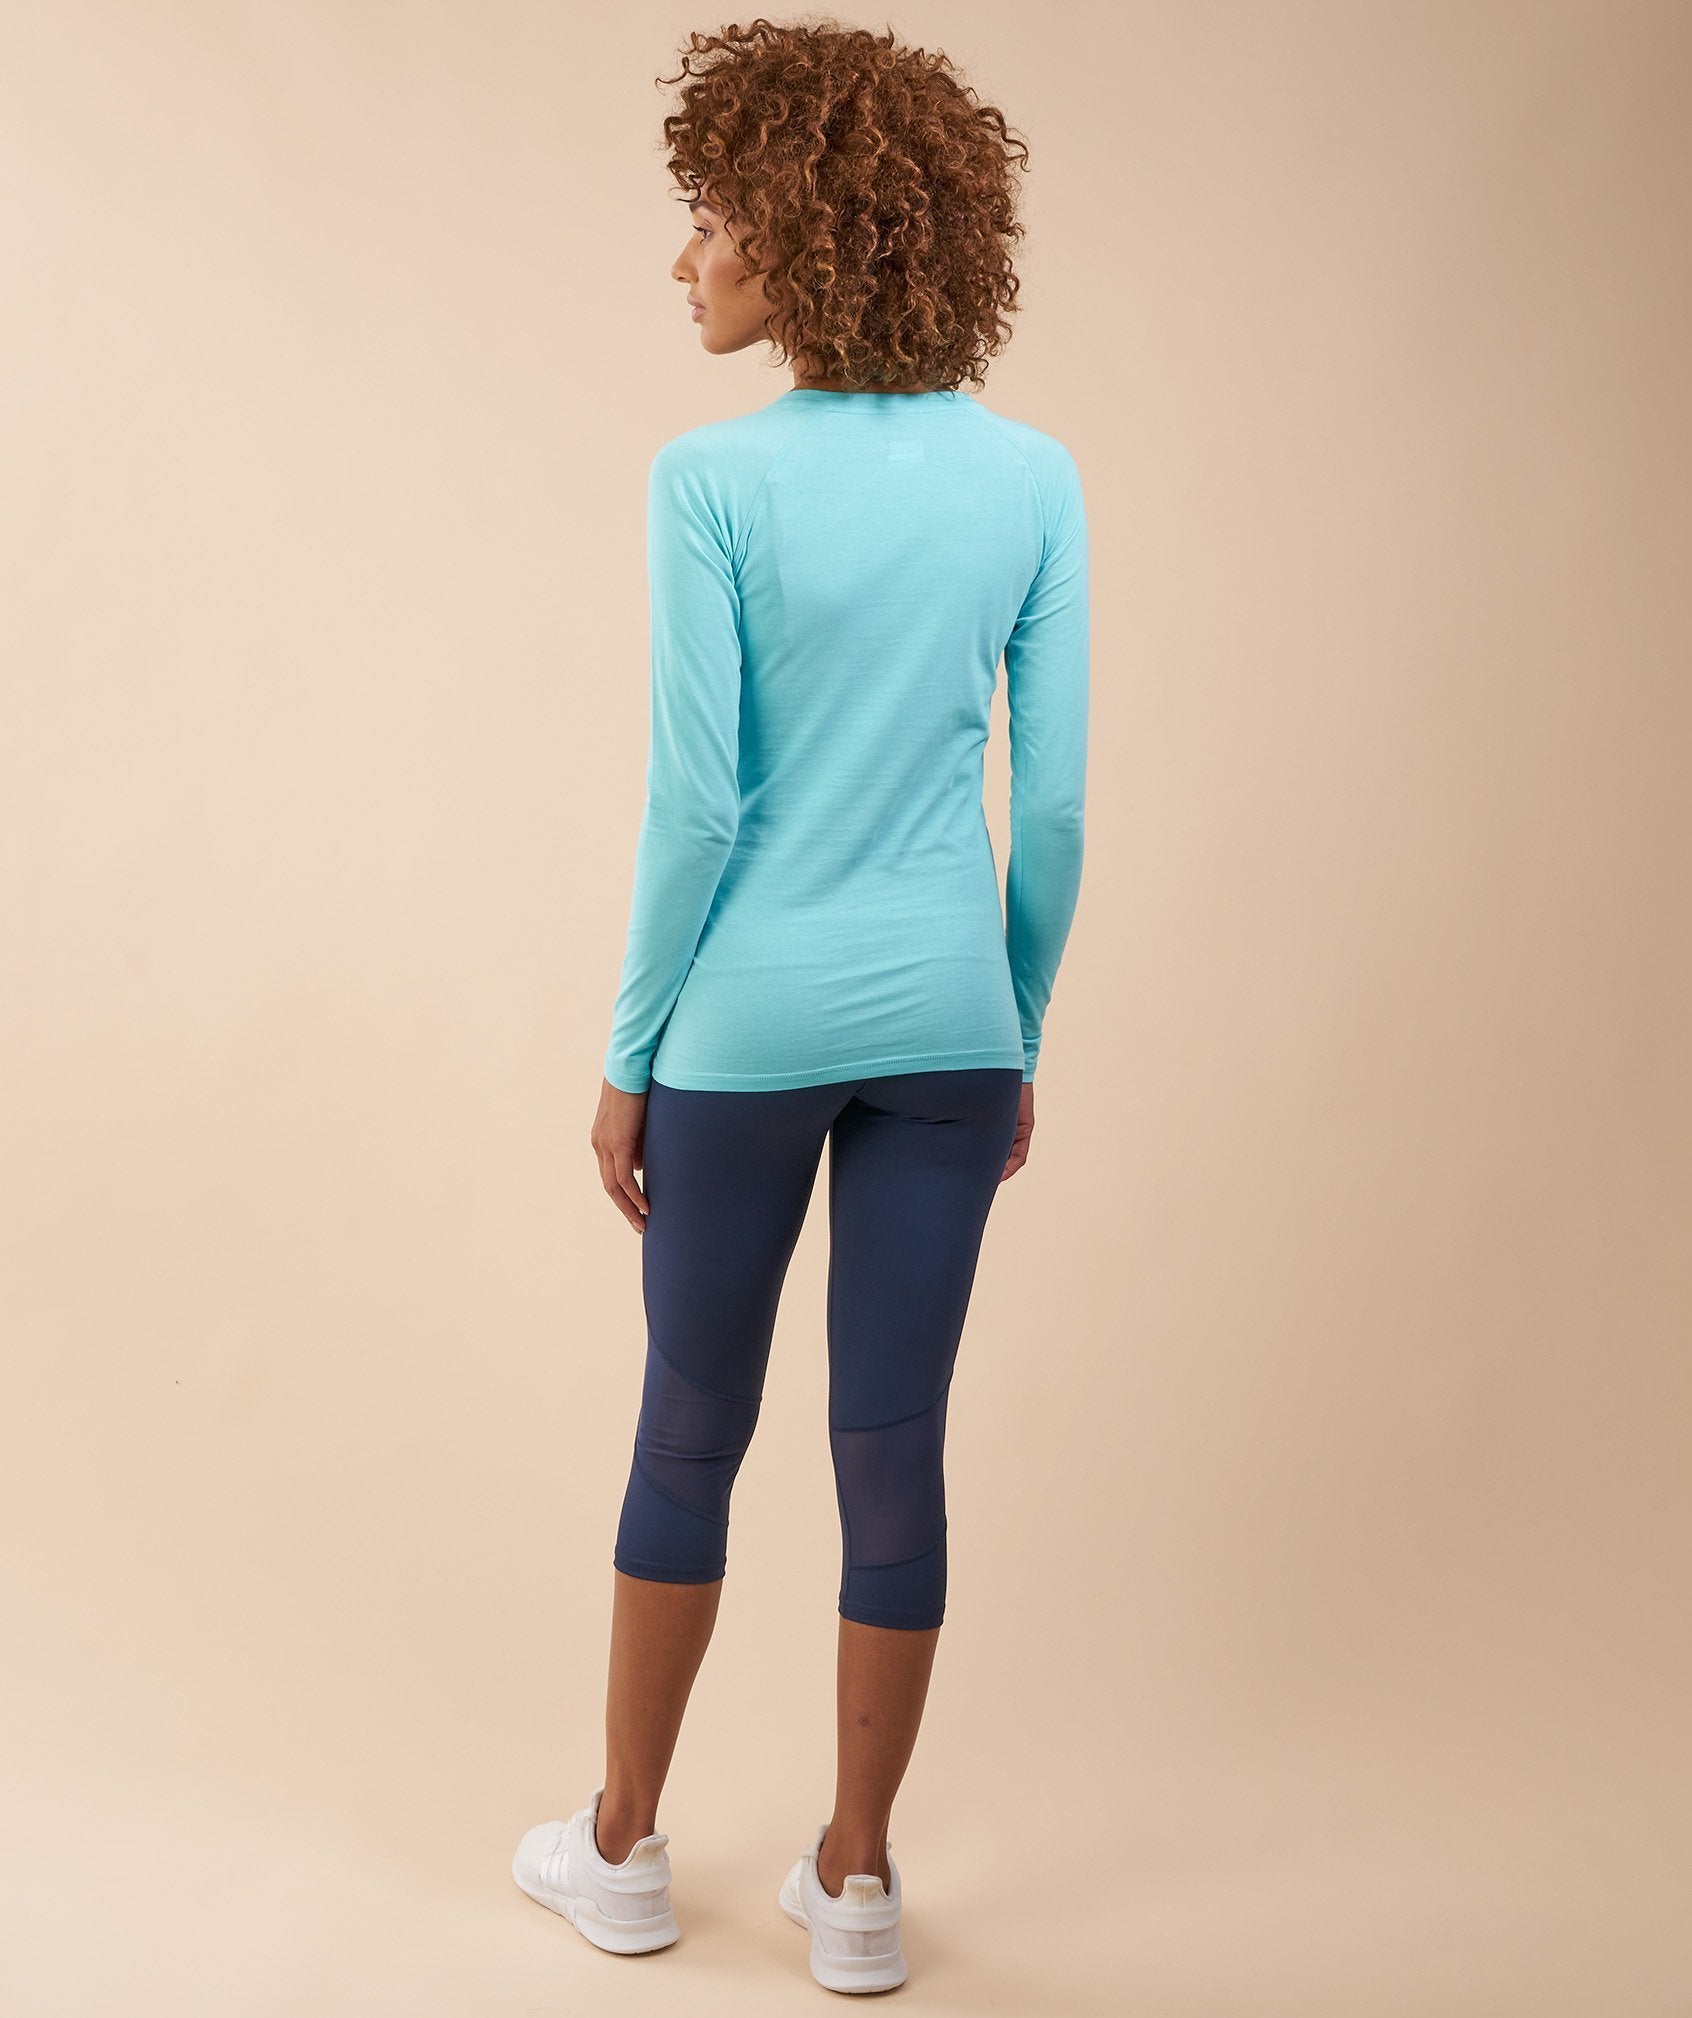 Verve Long Sleeve T-Shirt in Marine Blue - view 2